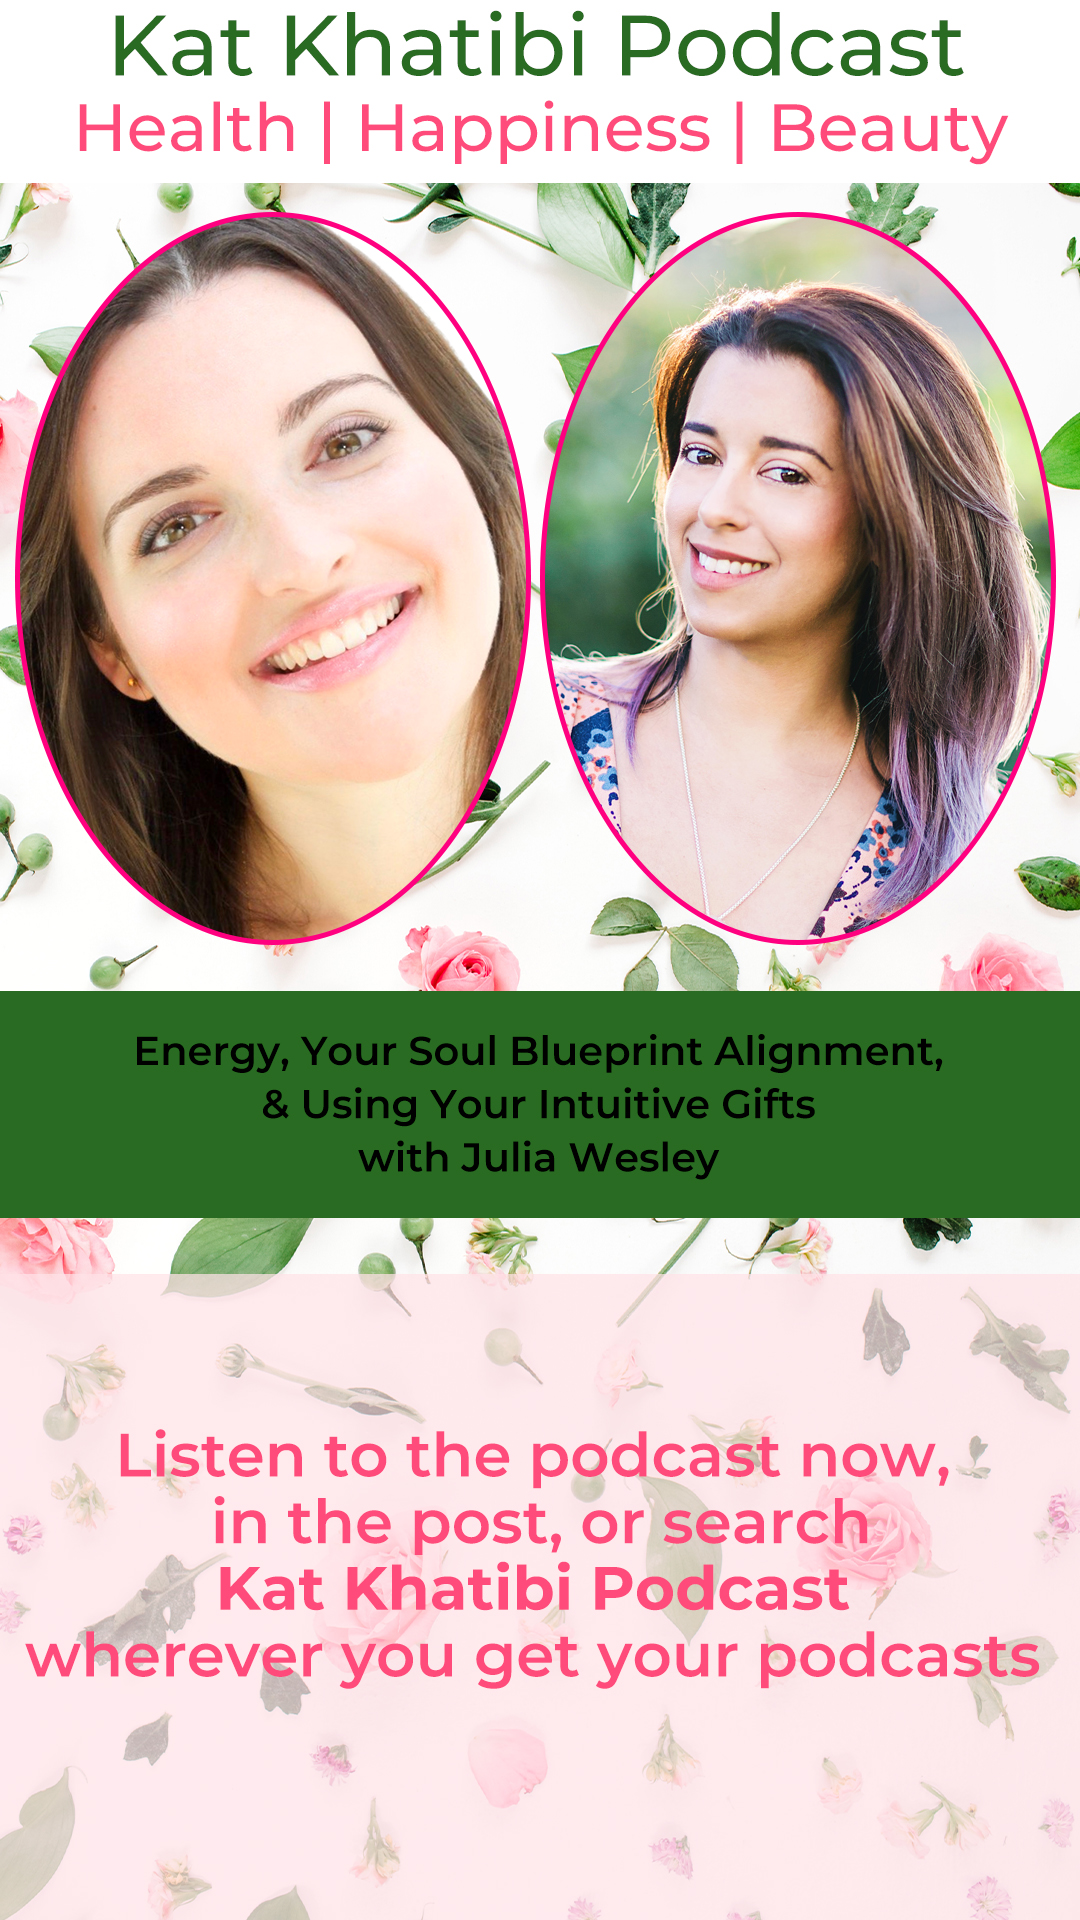 Energy, Your Soul Blueprint Alignment, & Using Your Intuitive Gifts with Julia Wesley